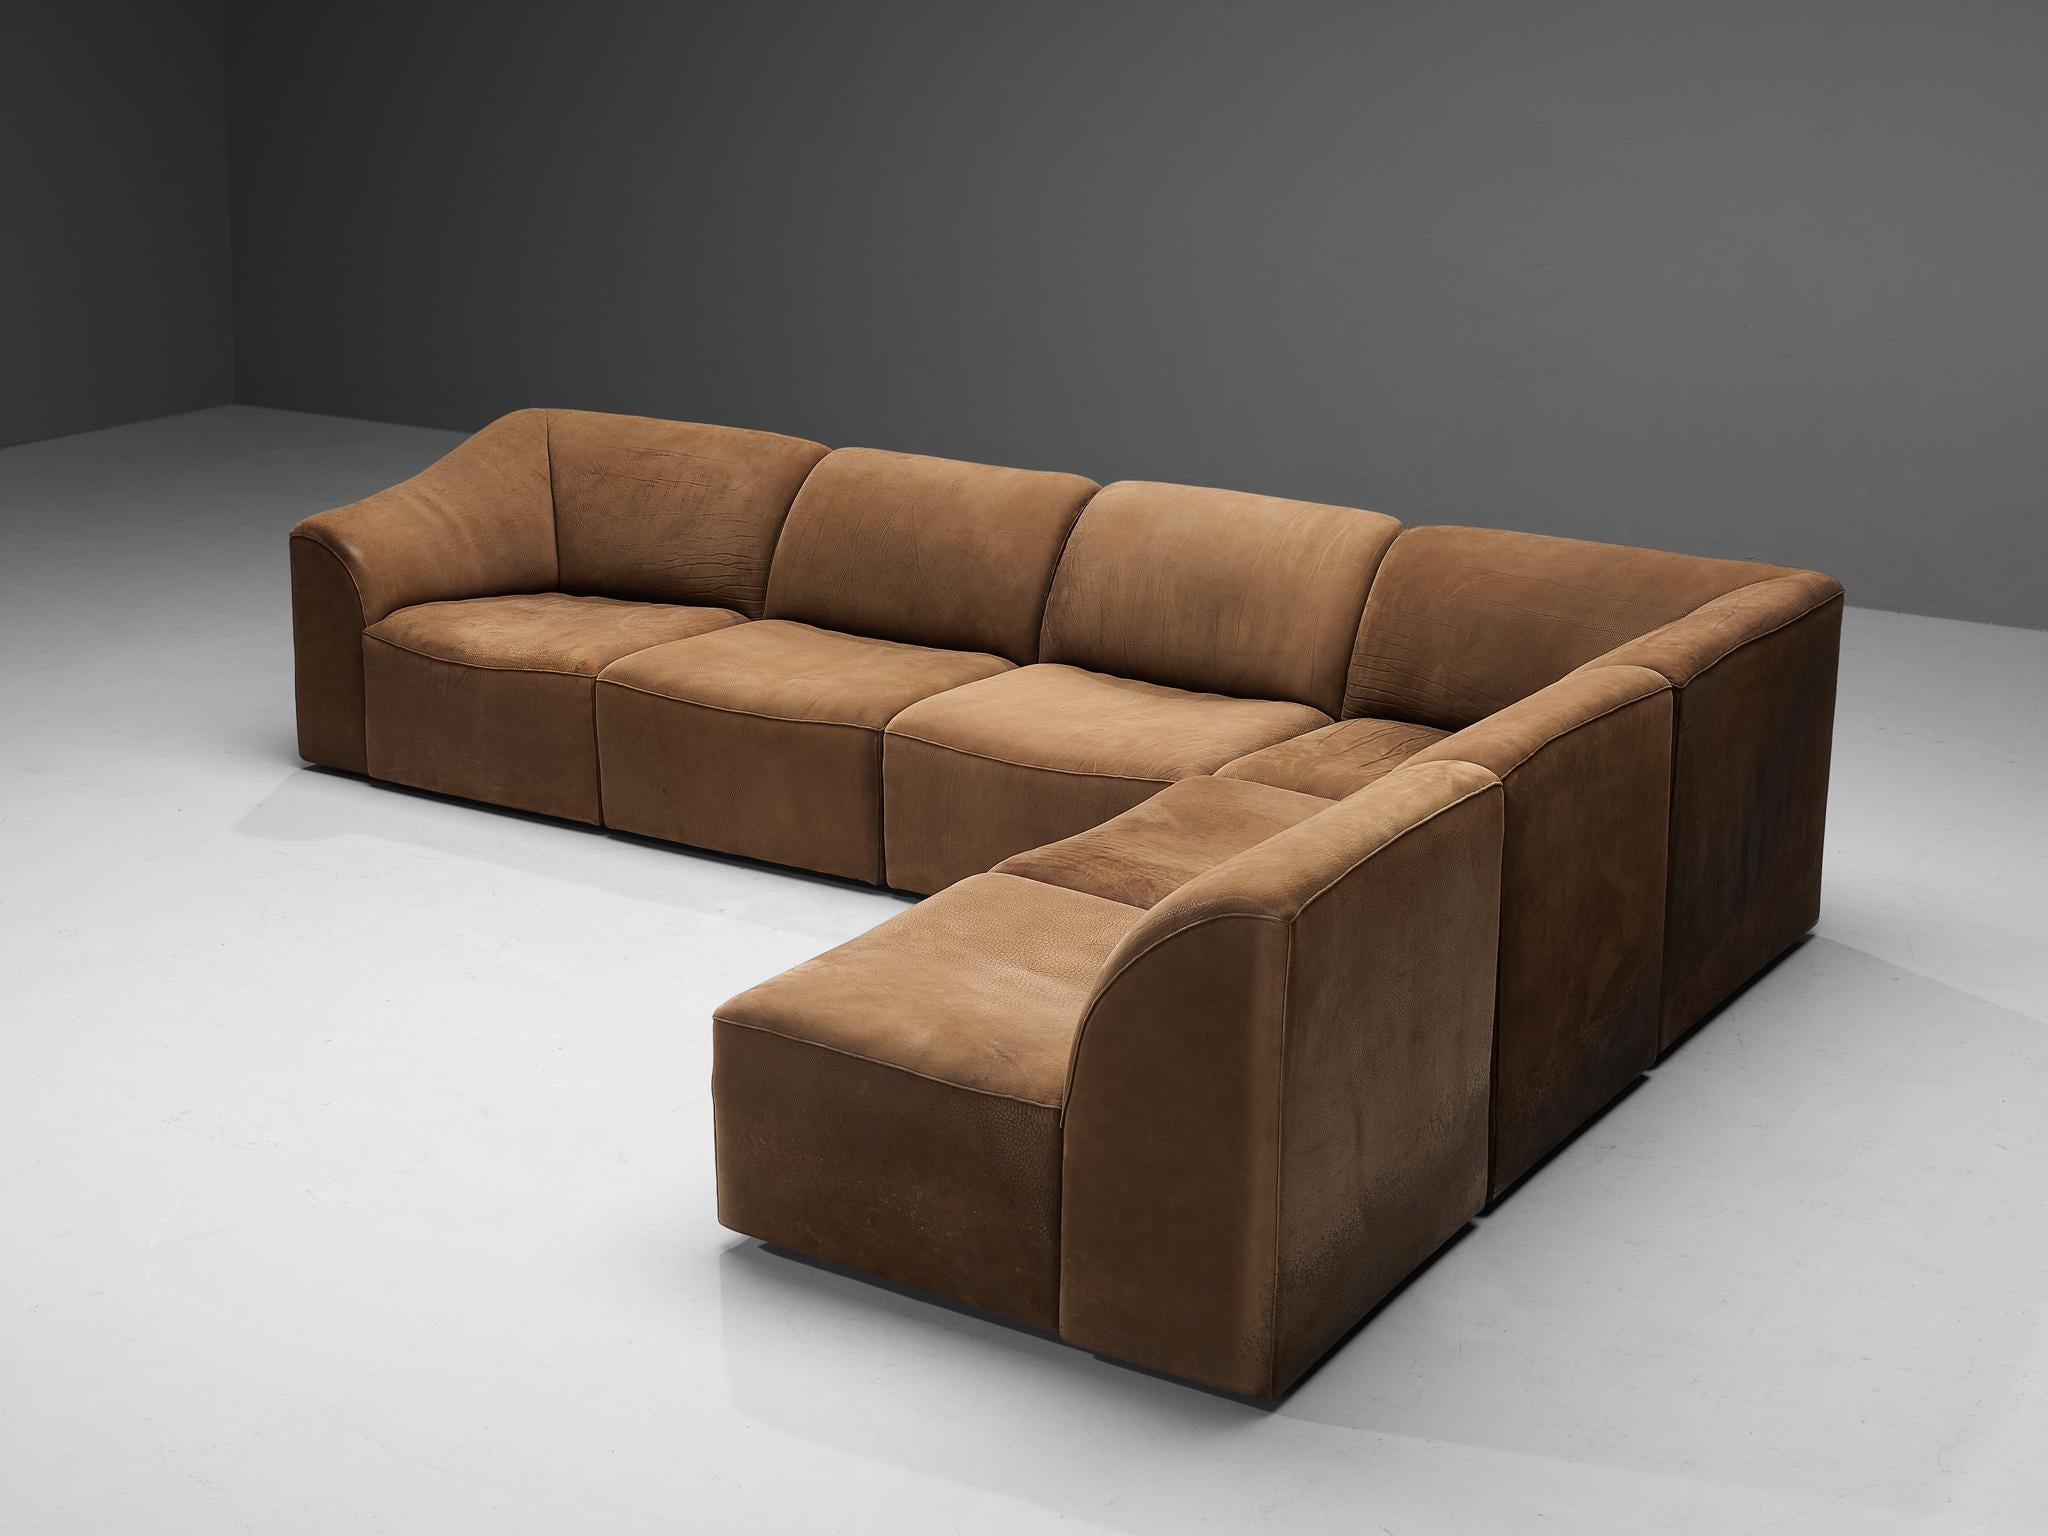 De Sede, 'DS-10' sectional sofa, leather, Switzerland, 1970s.

This high-quality sectional sofa designed by De Sede in the 1970s contains six elements, making it possible to arrange this sofa to your own wishes. This set becomes very versatile as it